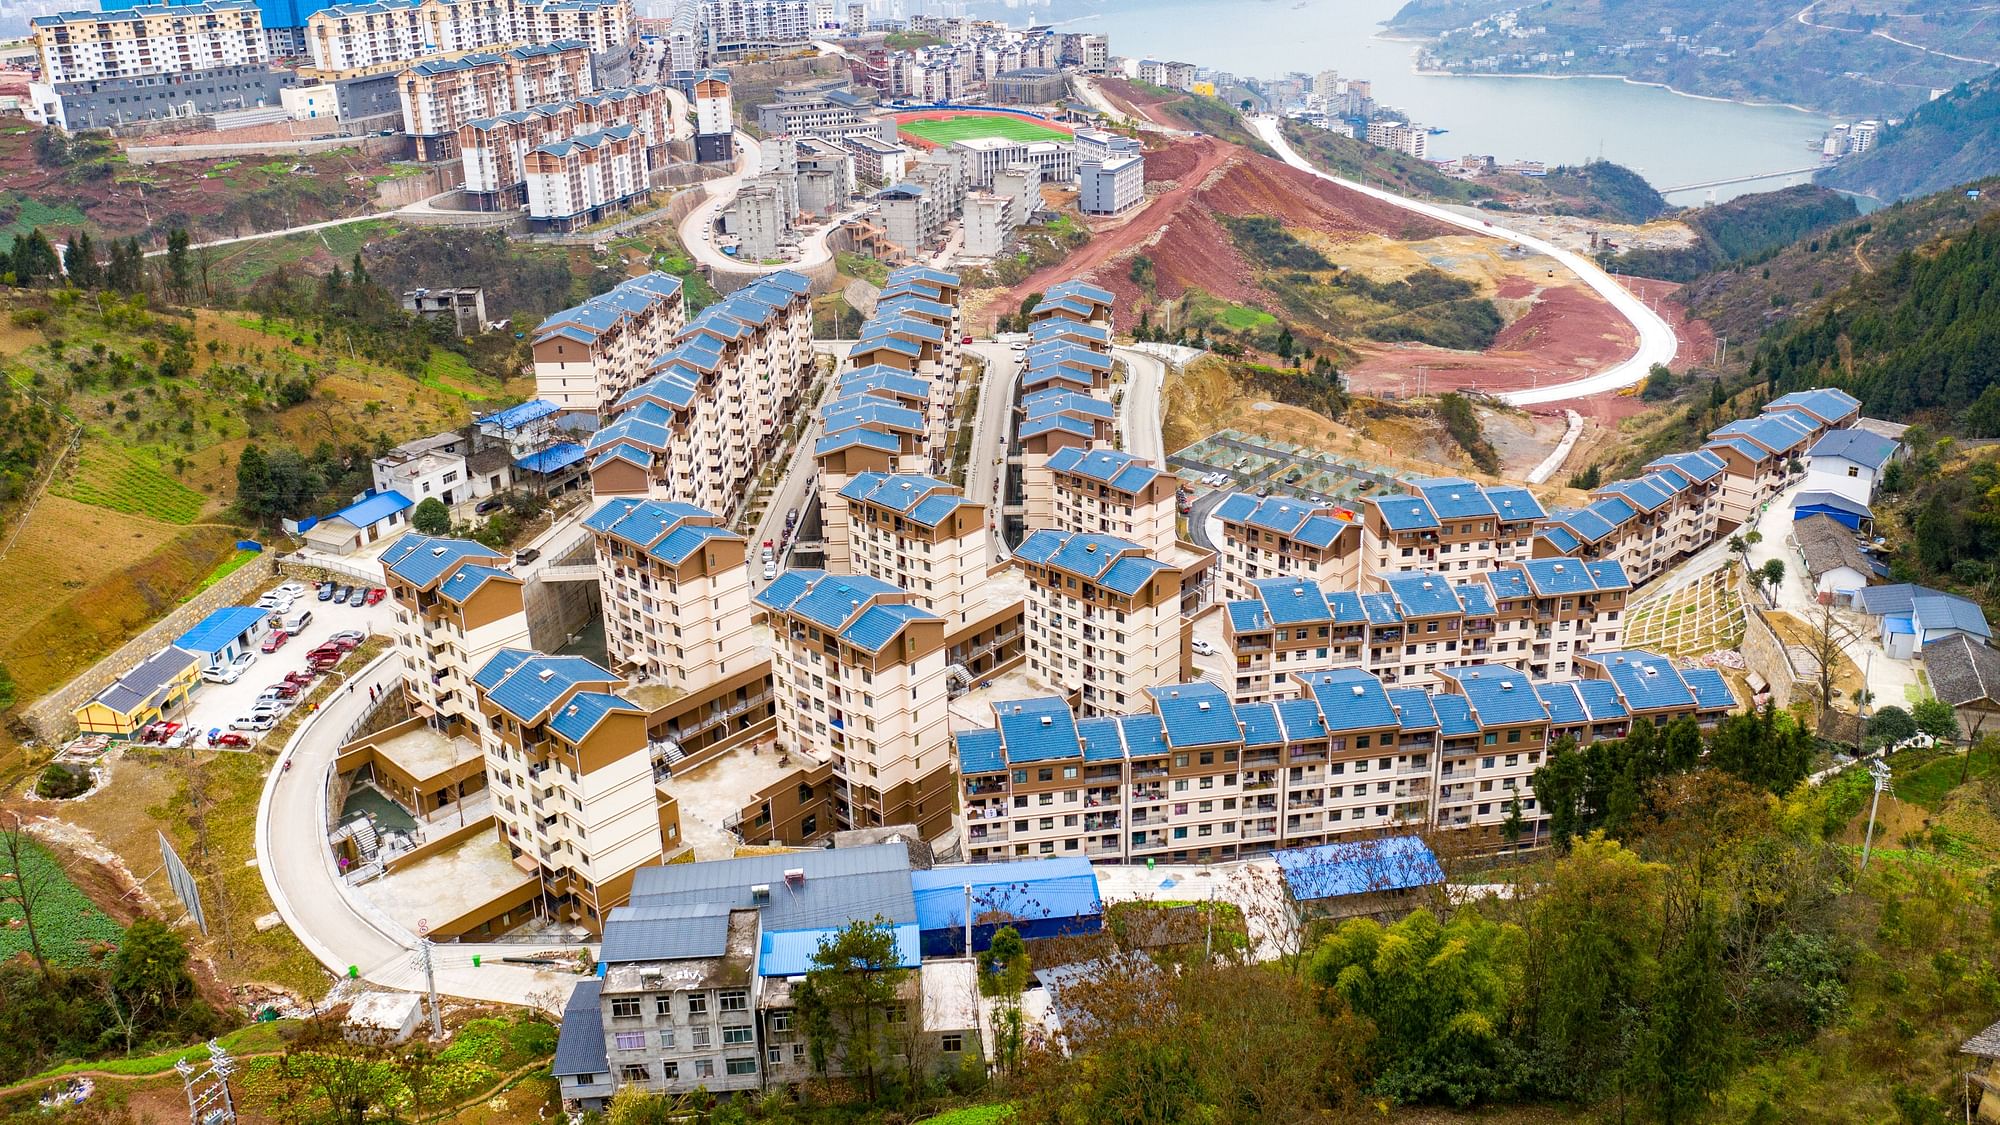 A bird’s-eye view of Qingfanyuan Community, which is now home to more than 2,700 villagers.